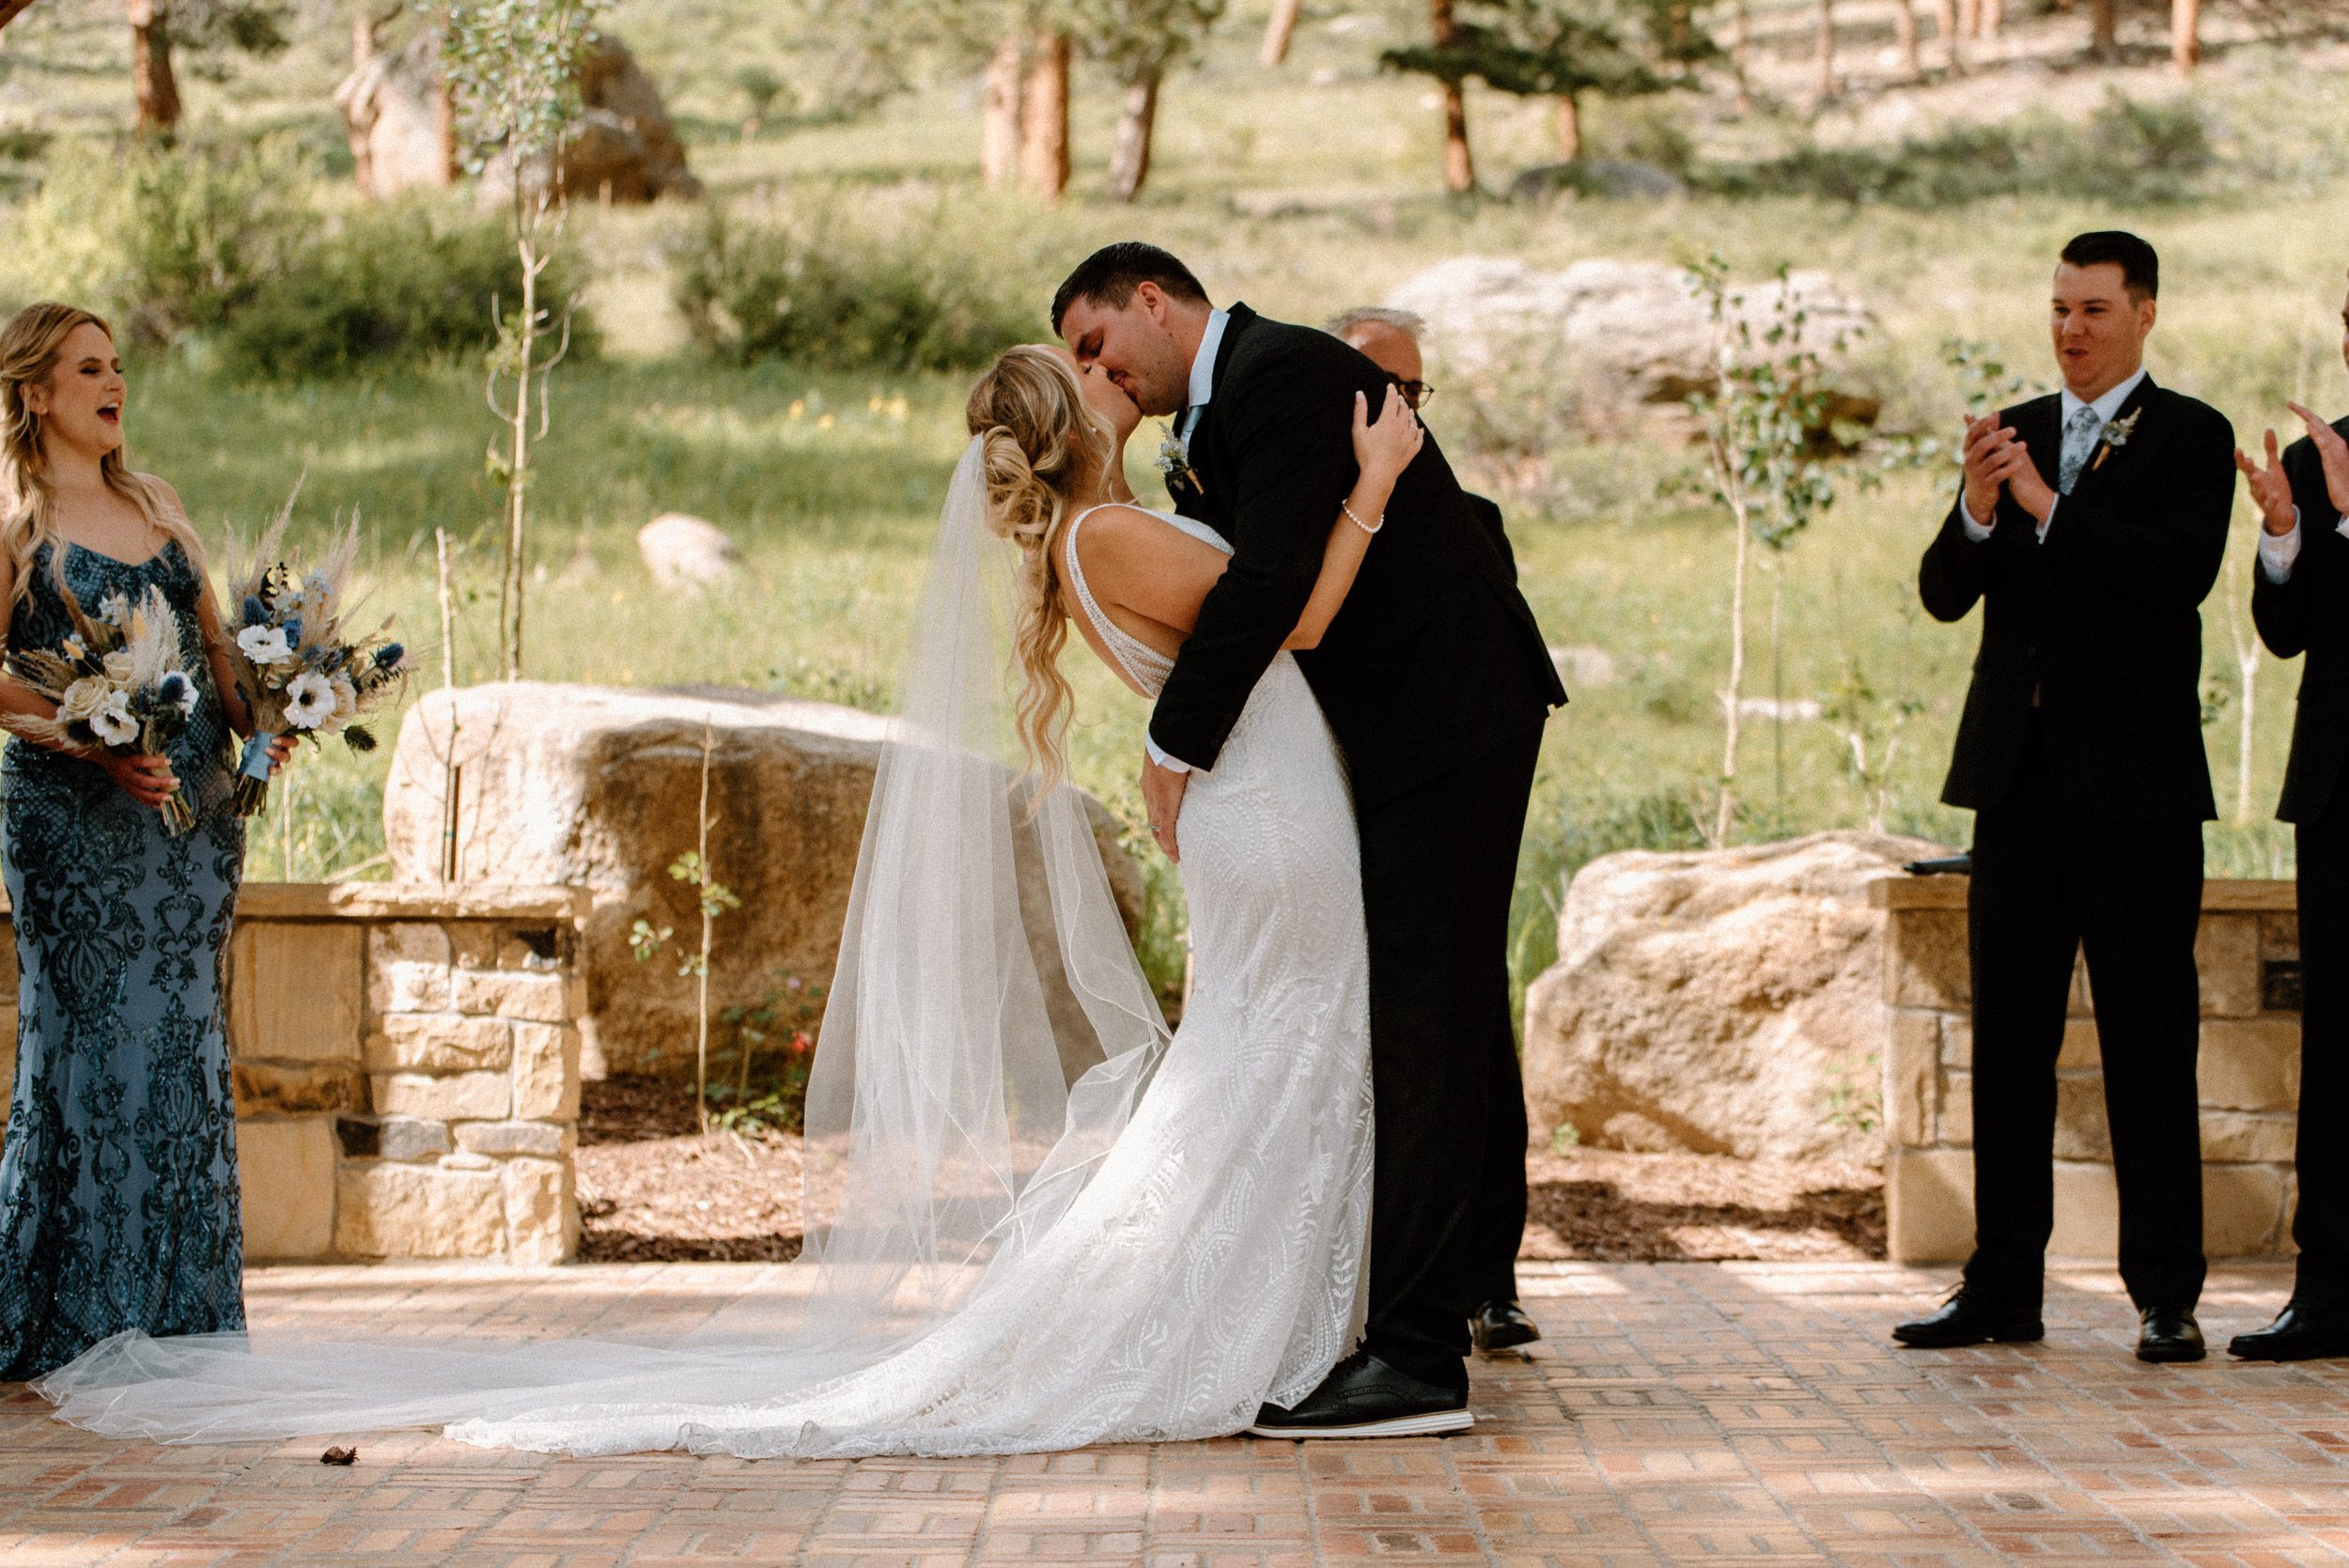 The bride and groom share their first kiss at the altar at the Della Terra Mountain Chateau in Estes Park, CO